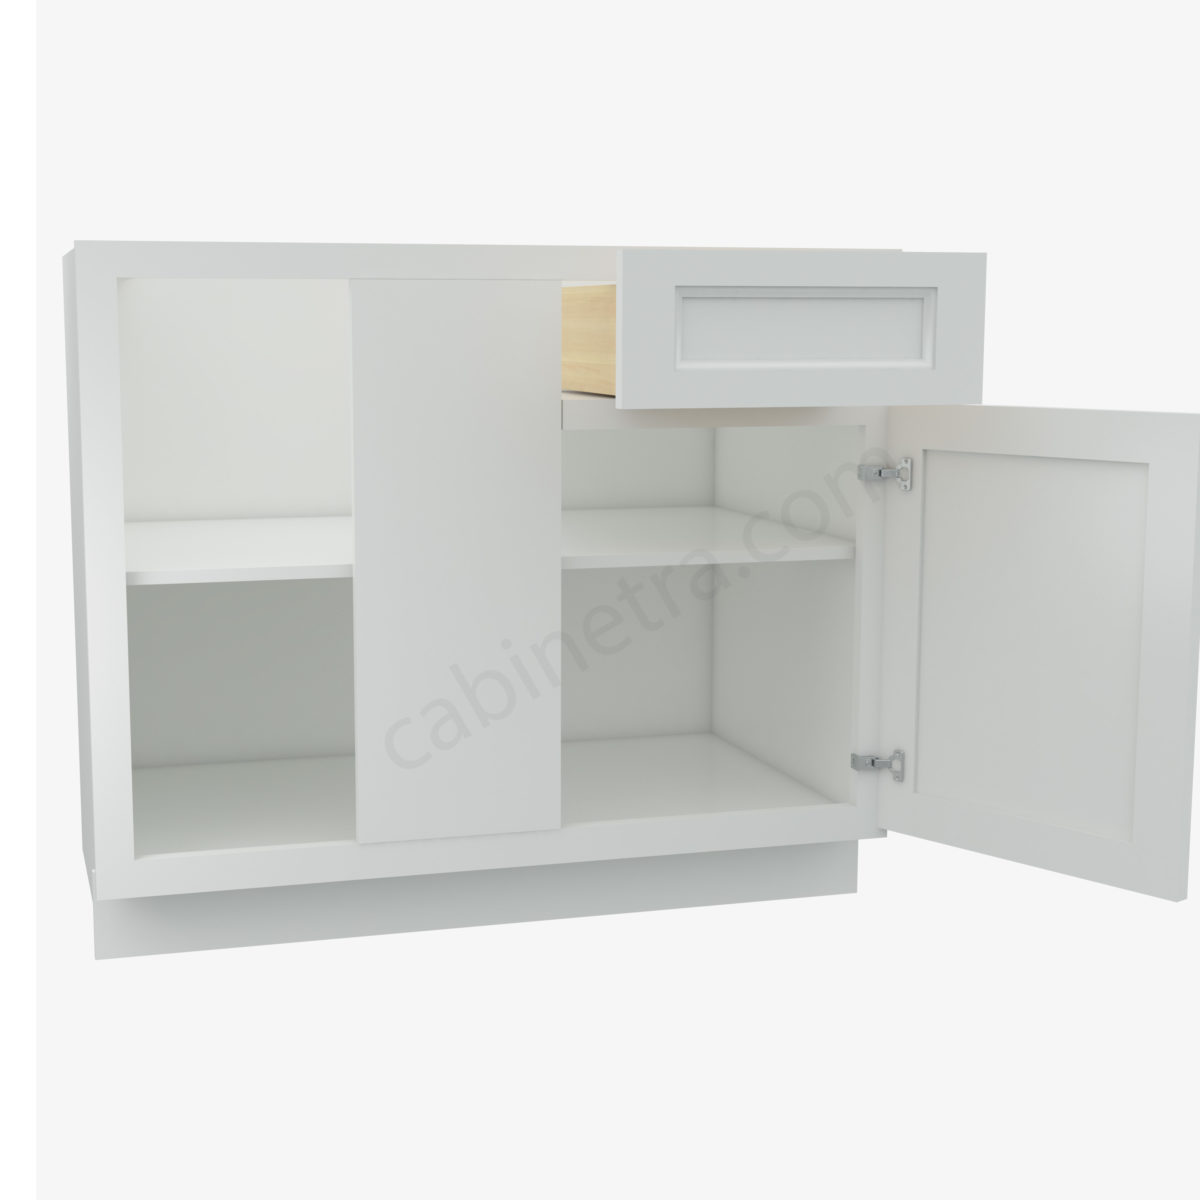 TW BBLC42 45 39W 1 Forevermark Uptown White Cabinetra scaled